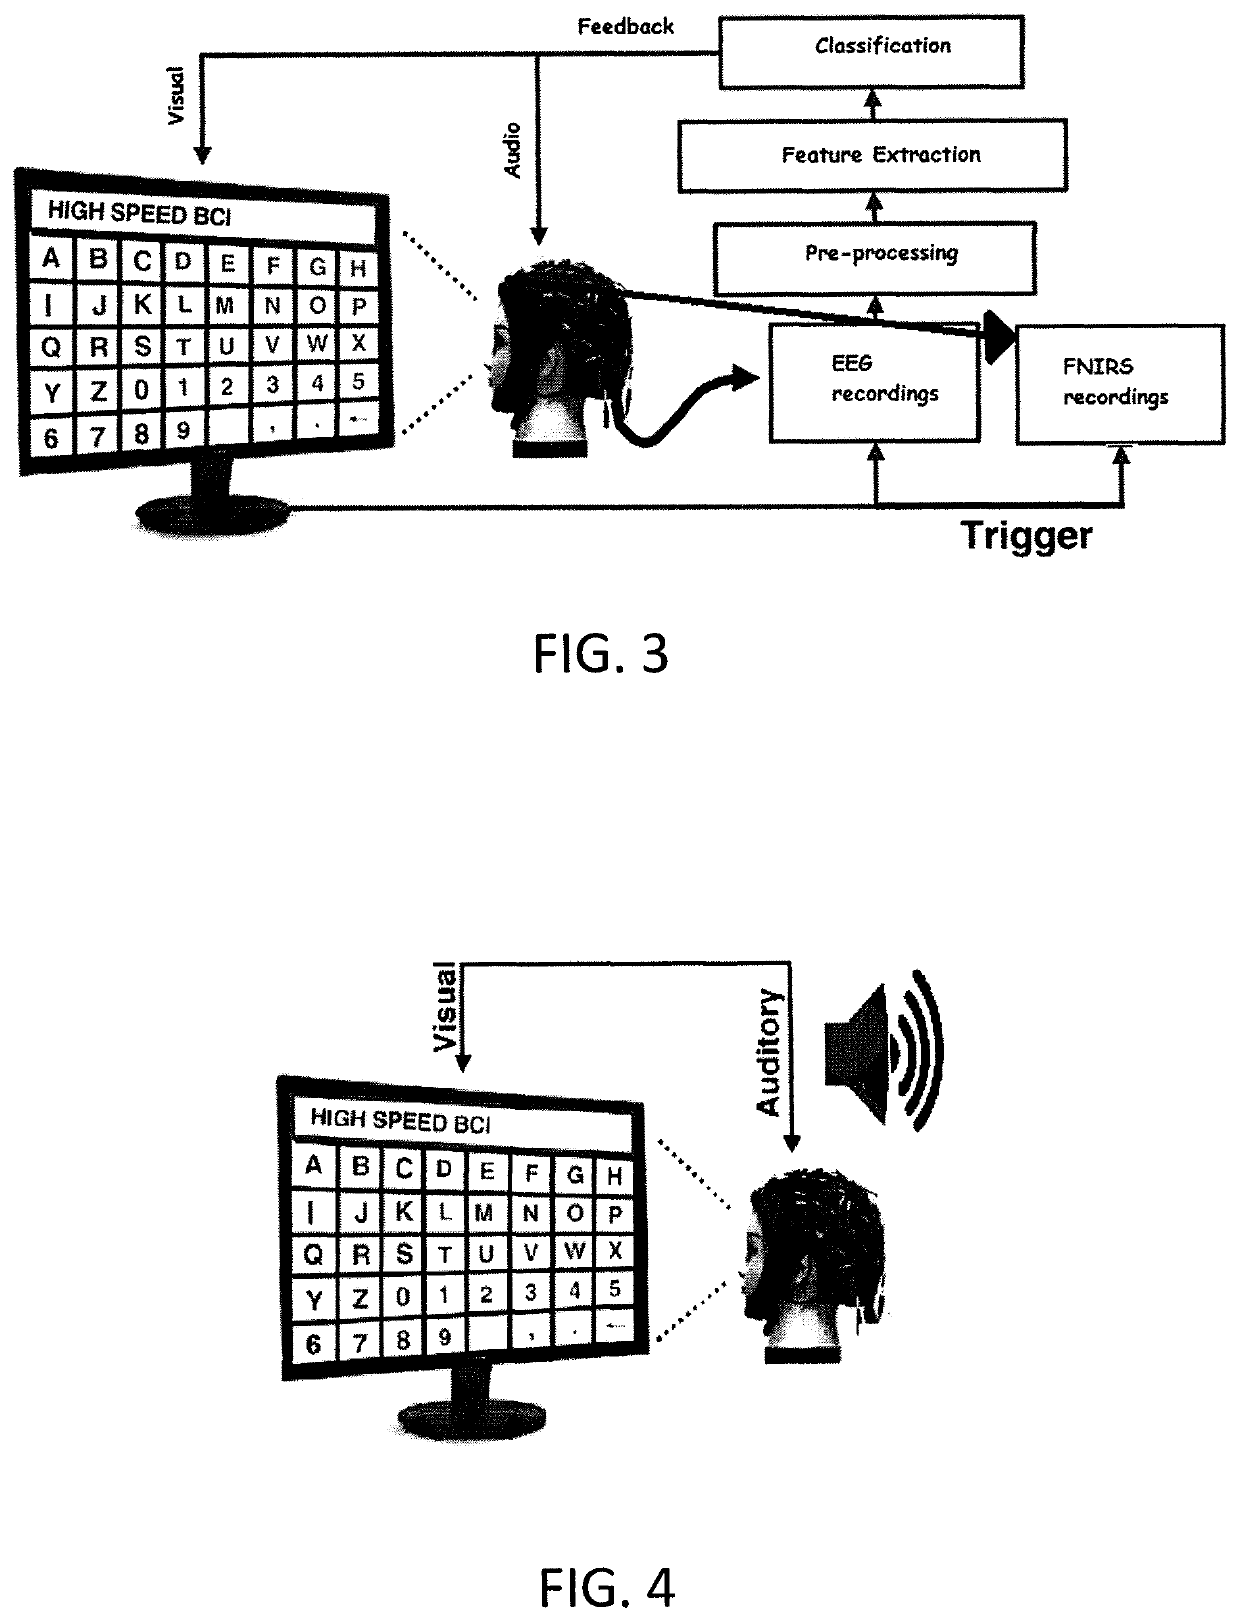 Letter and number recognition system using EEG-fNIRS for speech impaired people